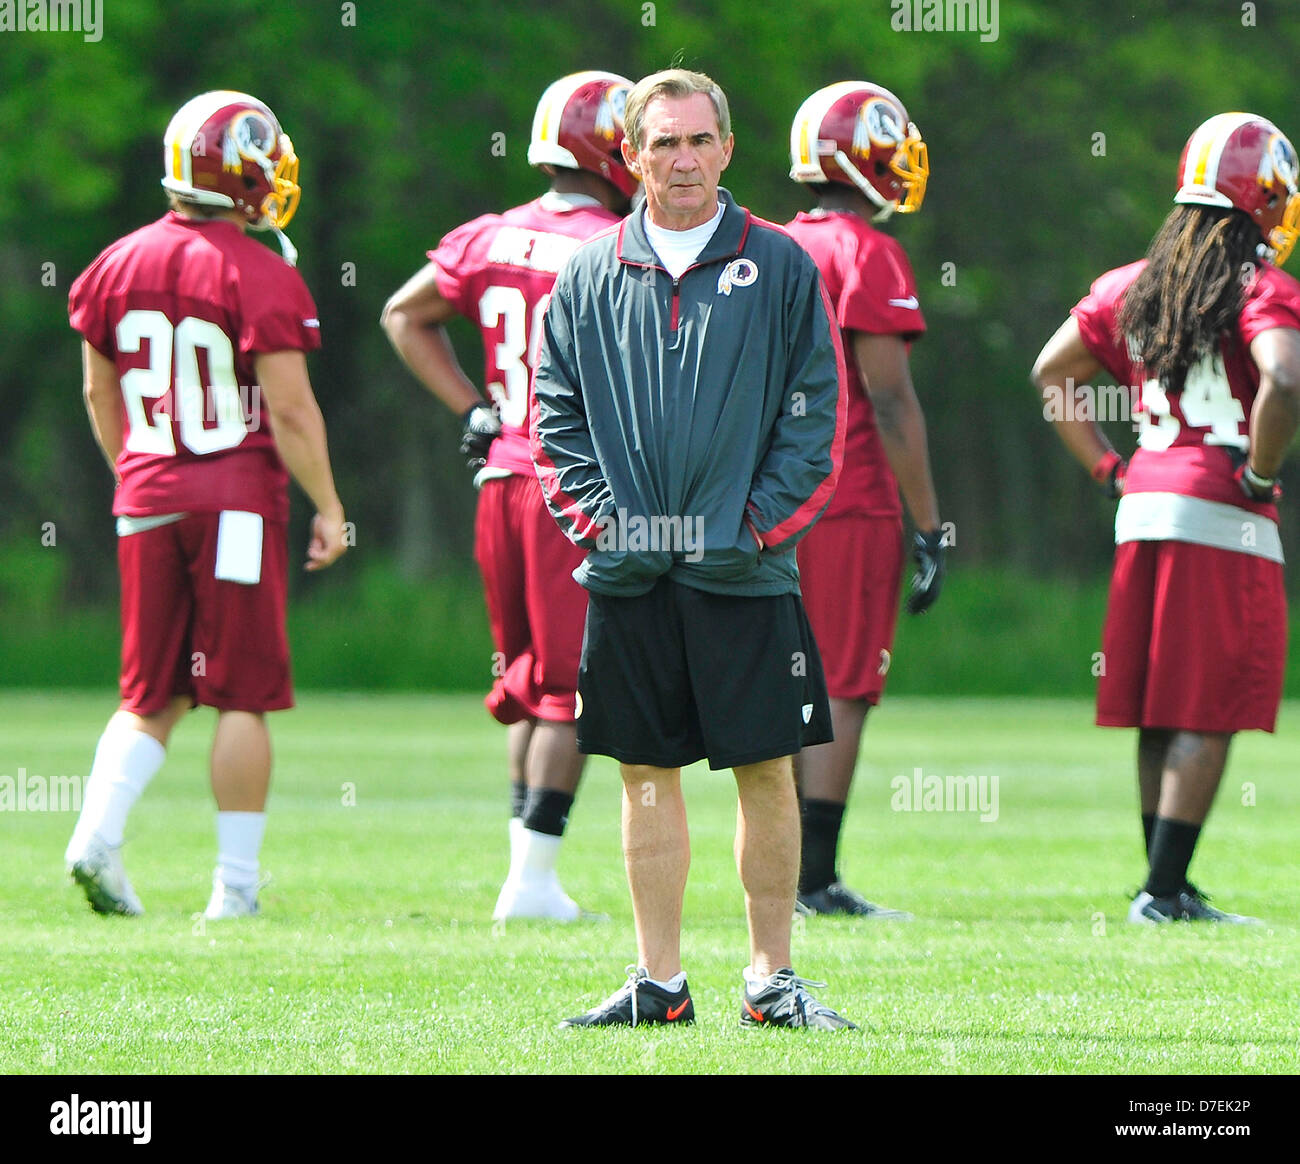 Washington Redskin Head Coach Mike Shanahan looks on as players participate in the Washington Redskins' rookie minicamp at Redskins Park in Ashburn, Virgina on Sunday, May 5, 2013..Credit: Ron Sachs / CNP Stock Photo